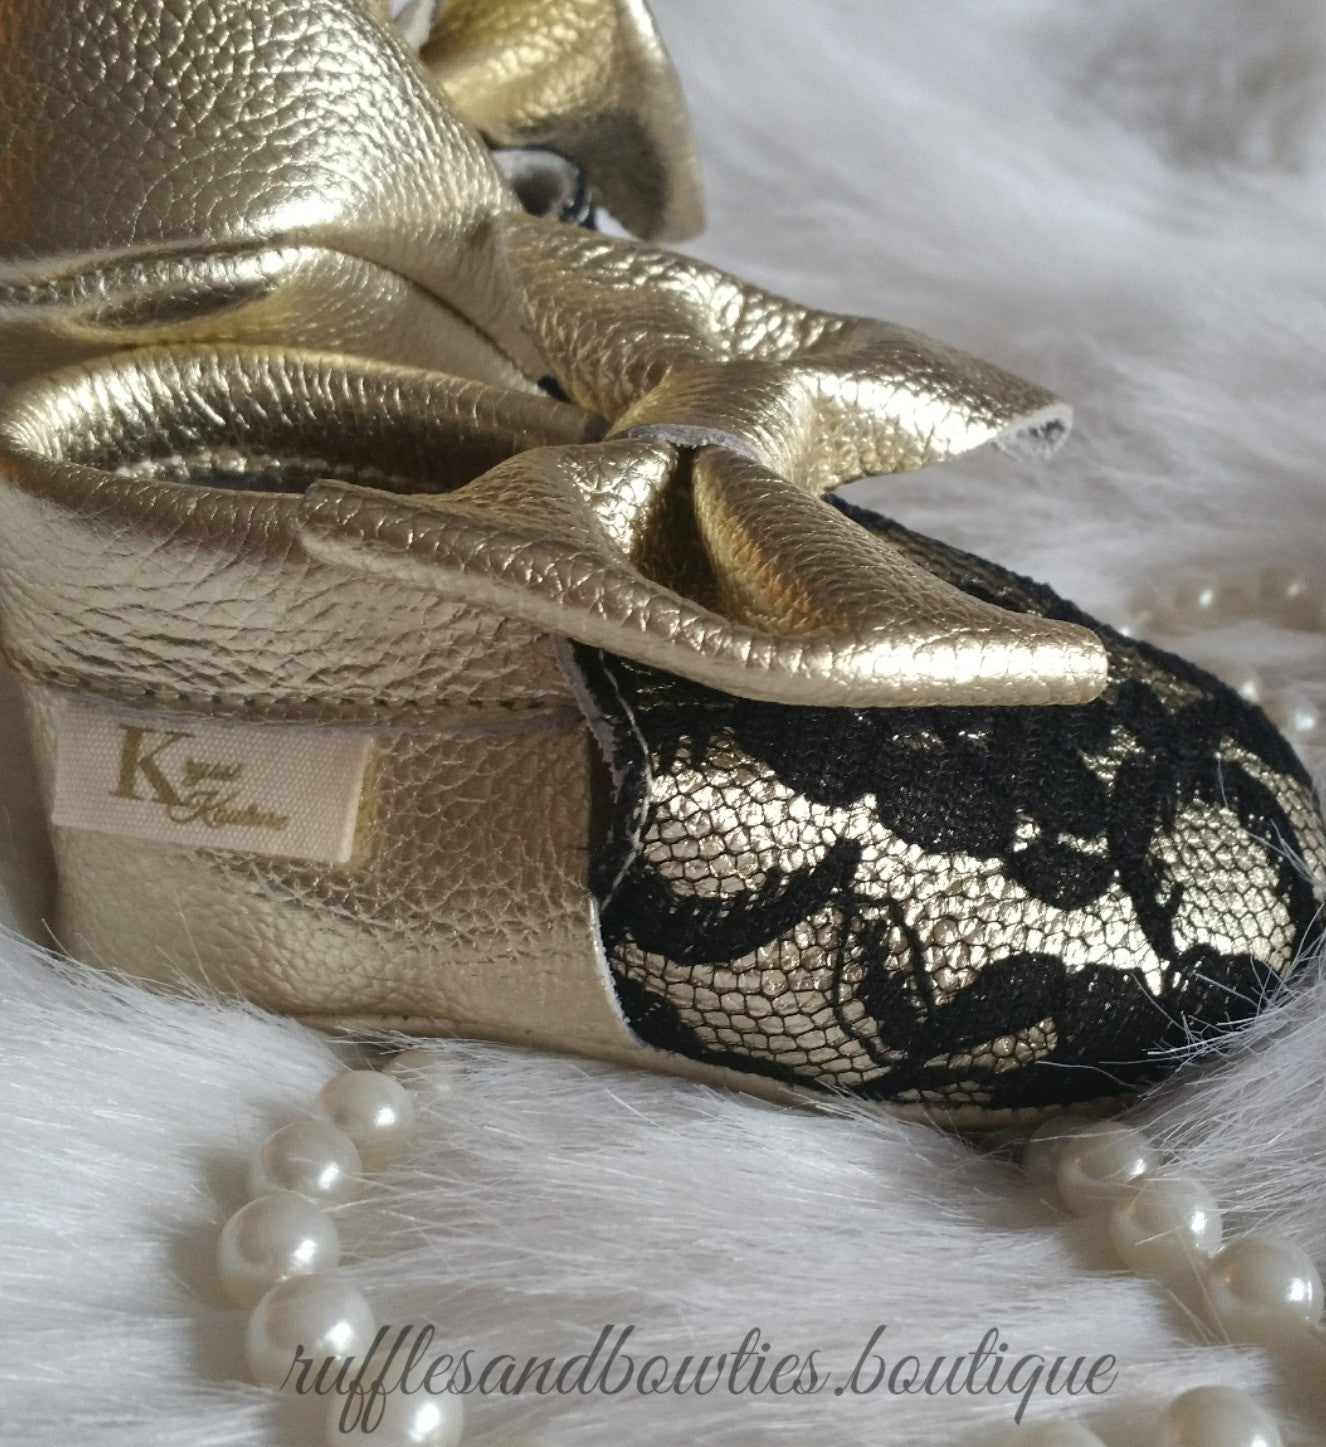 Baby Girl Lace leather Moccaisns - Gold with Black Lace Big Bow Leather Baby Moccasins - Baby Girl Moccasins - Bow Moccasins - Gold Bow Moccasins  - Soft Shoes - Lace Moccasins - Ruffles & Bowties Bowtique - 1